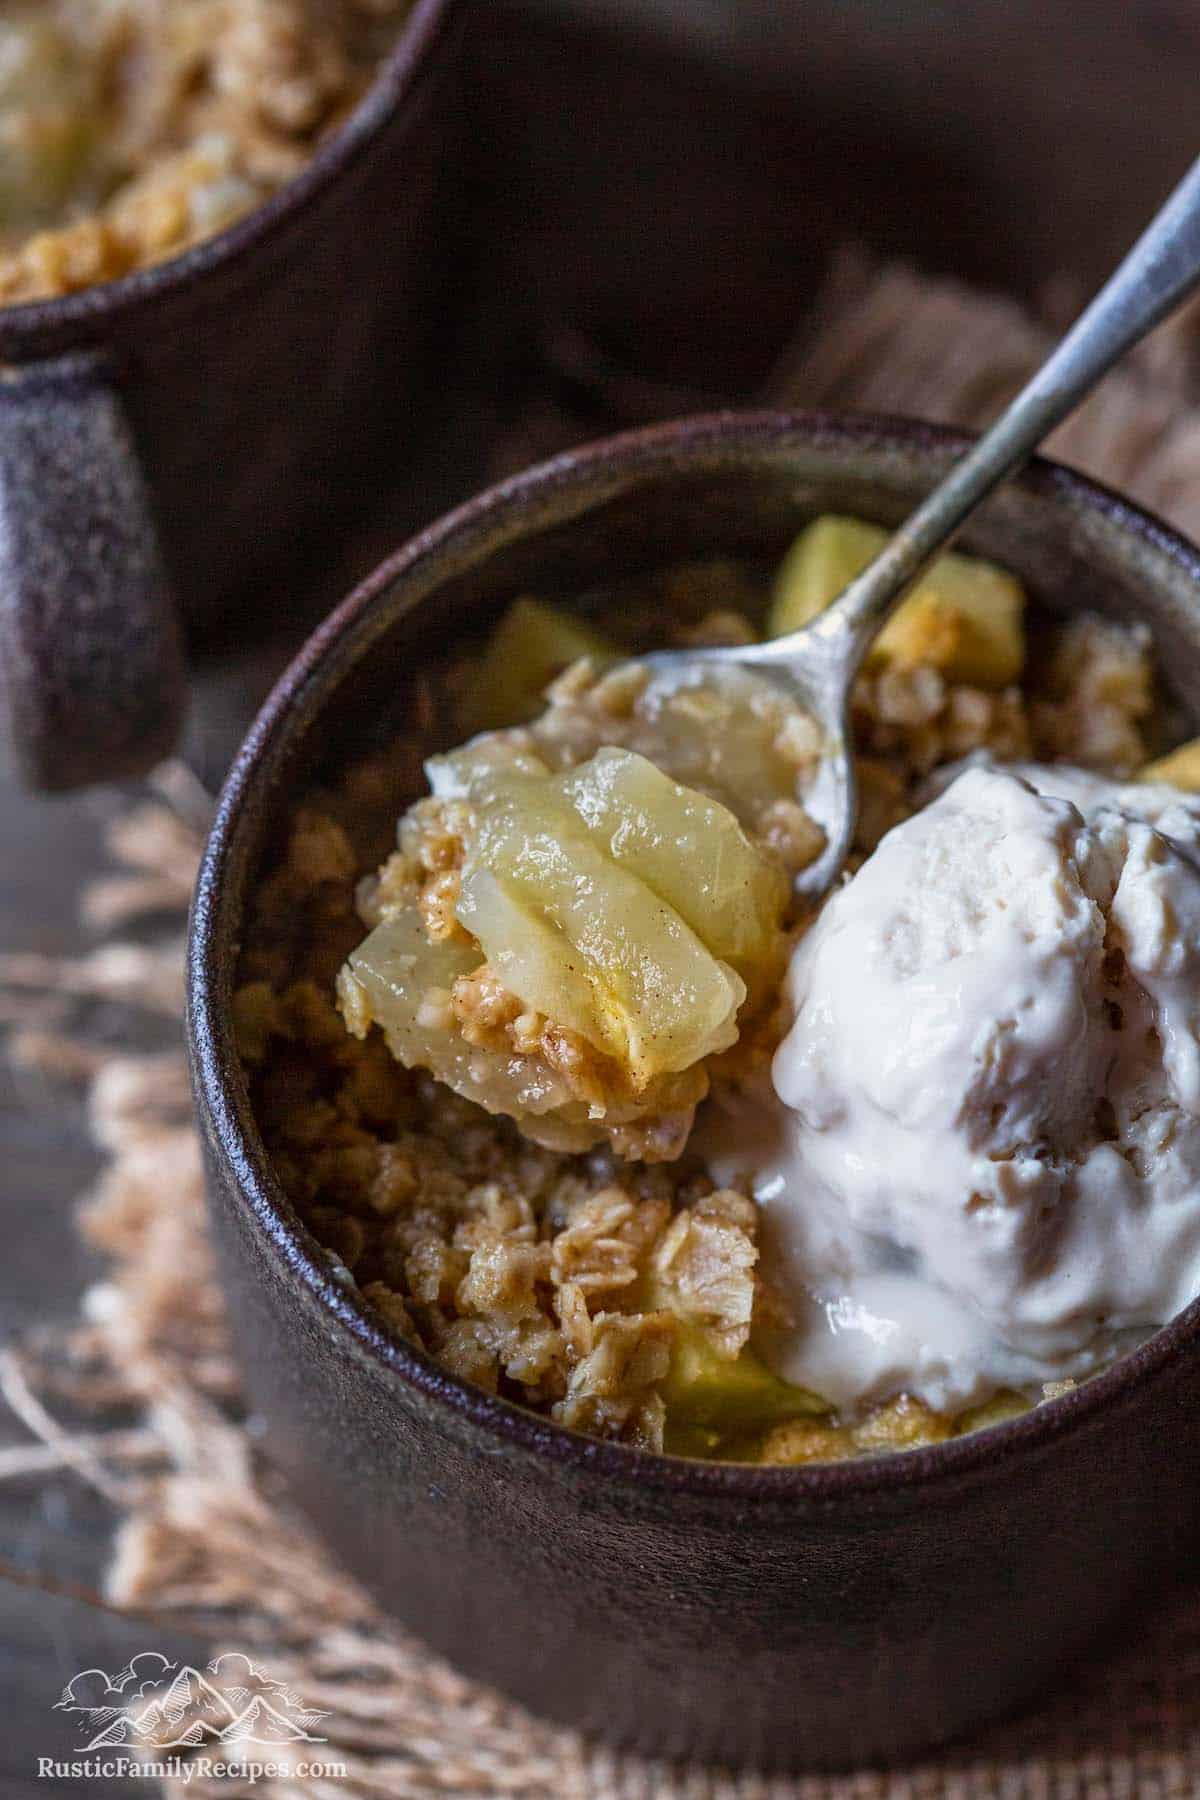 Apple crumble in a mug with ice cream and a spoon scooping some out